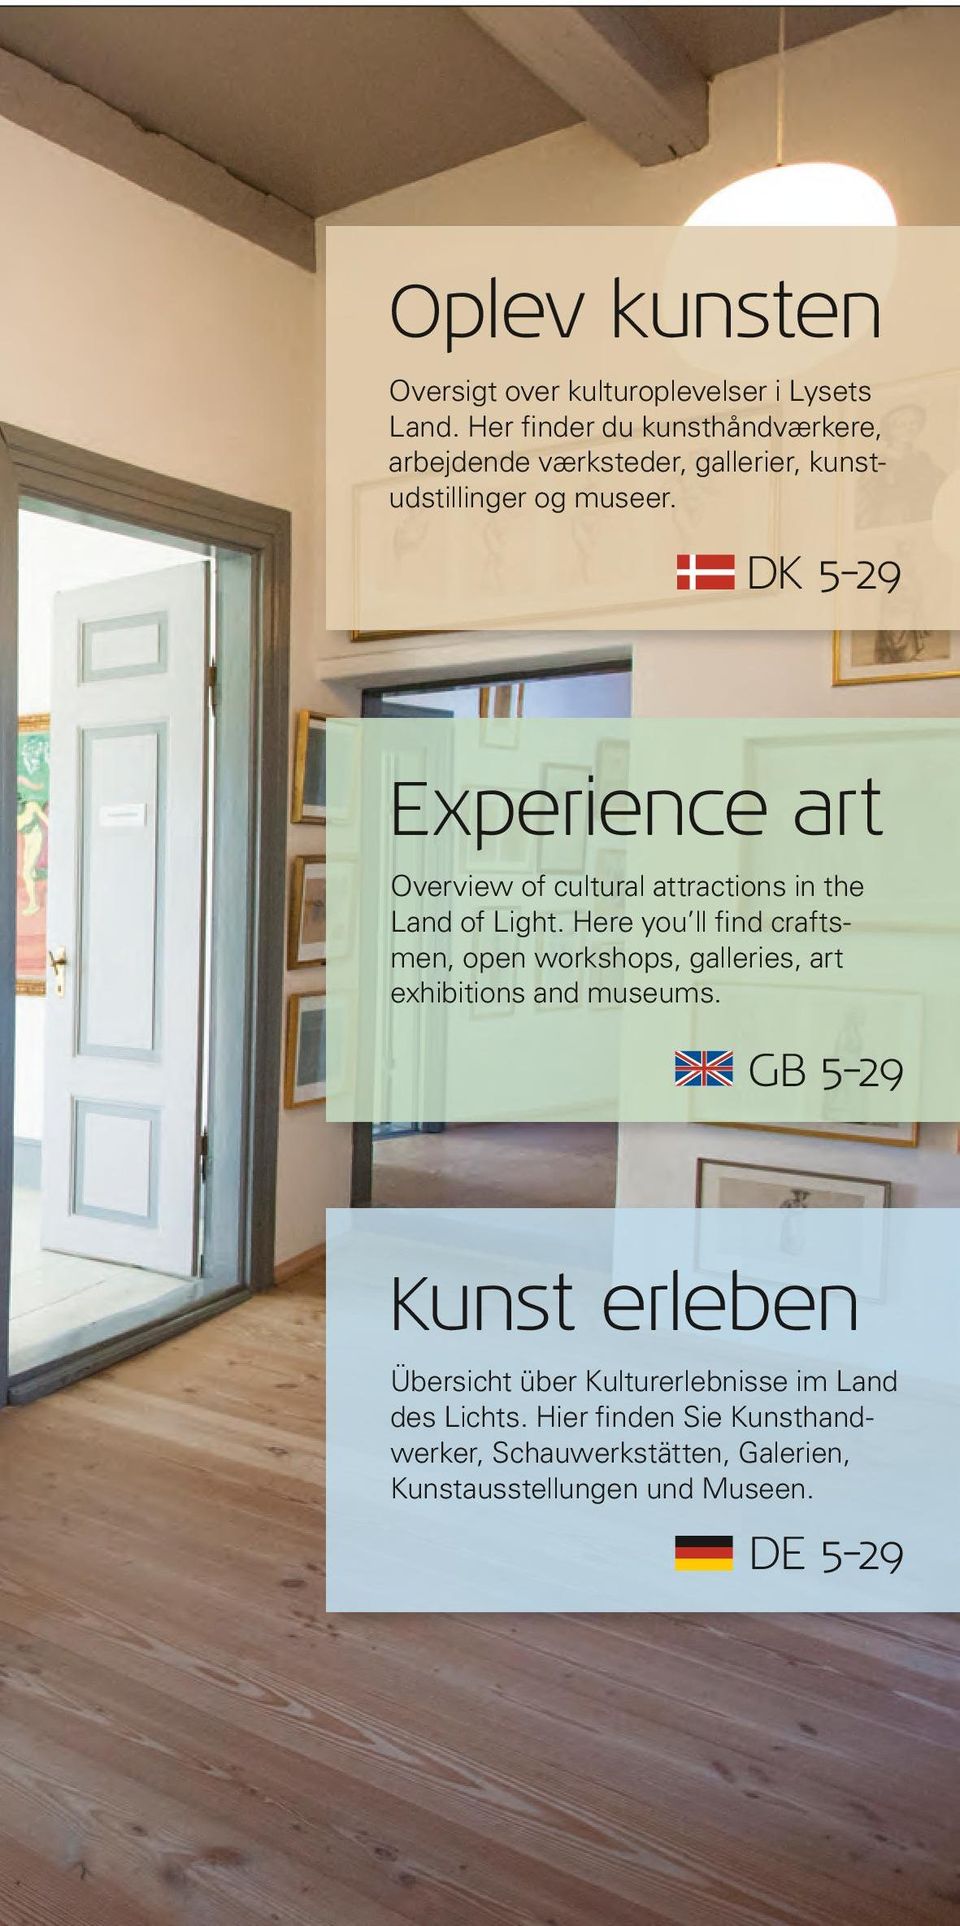 DK 5-29 Experience art Overview of cultural attractions in the Land of Light.